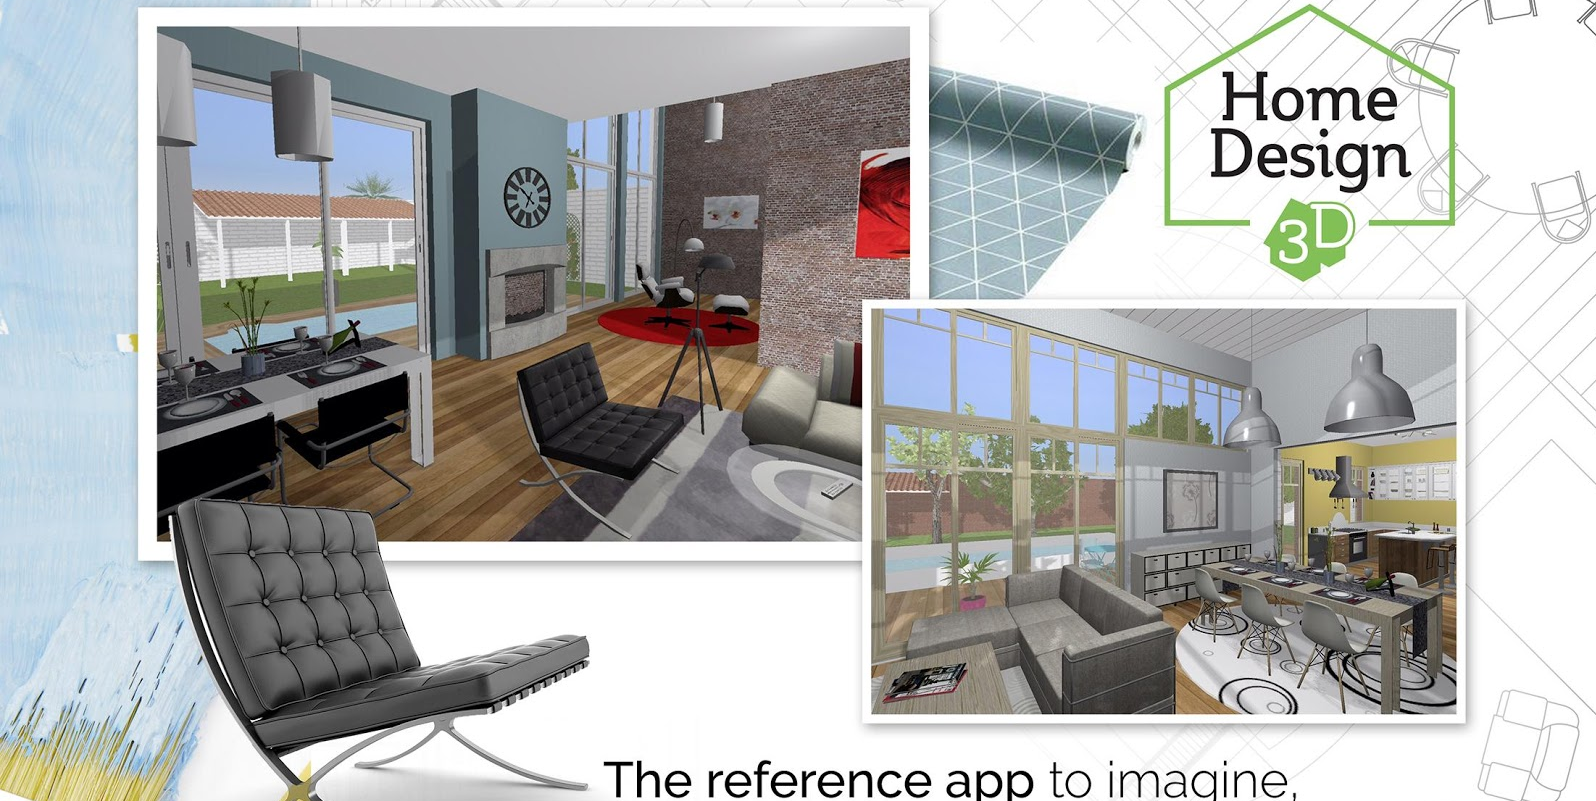 Home design 3d for pc